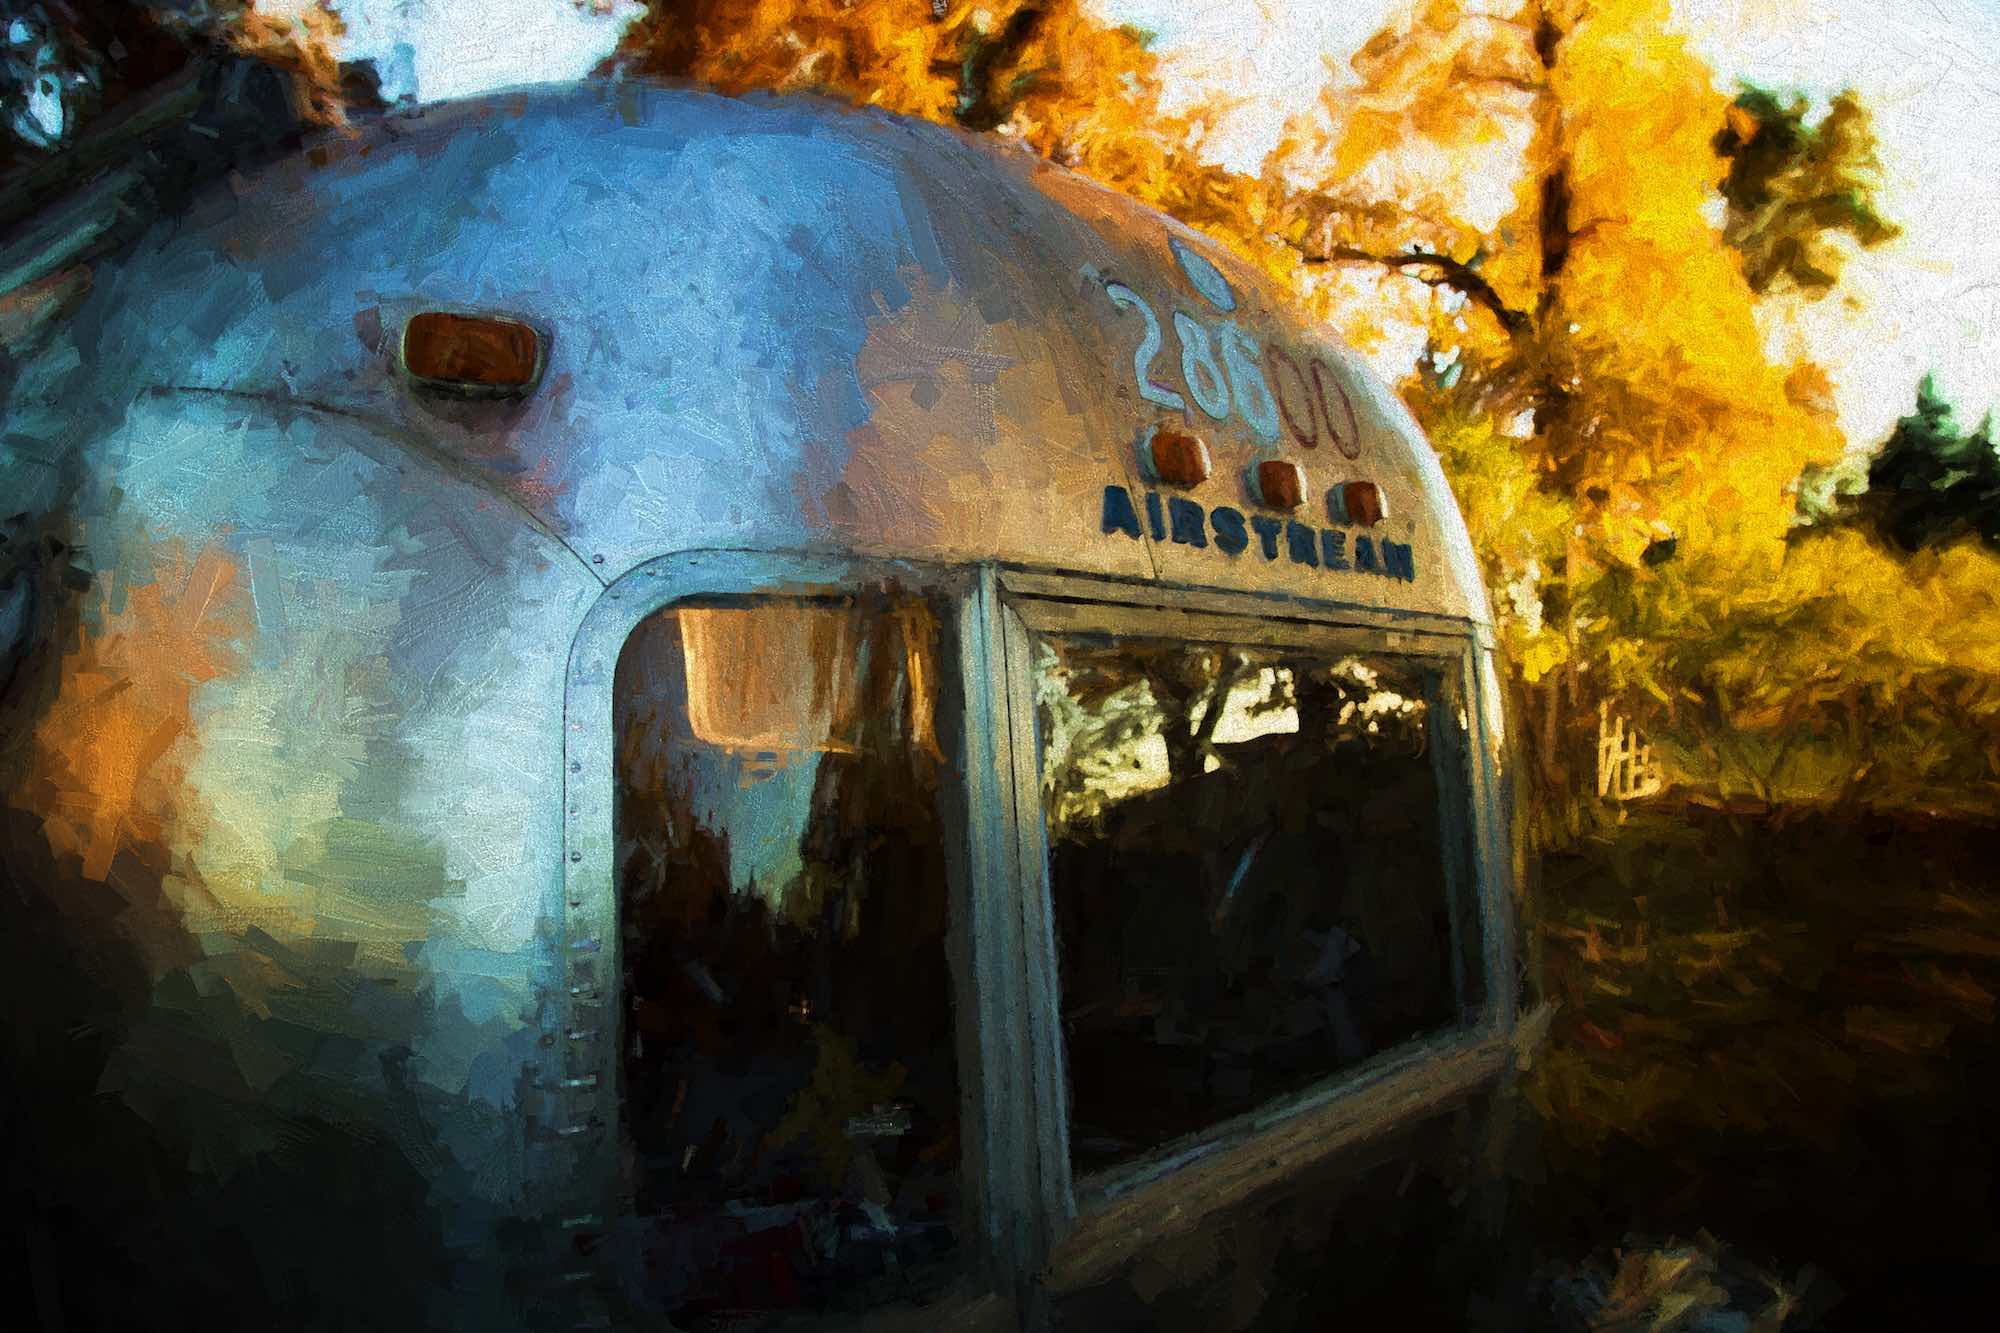 Front view of a vintage Airstream camper